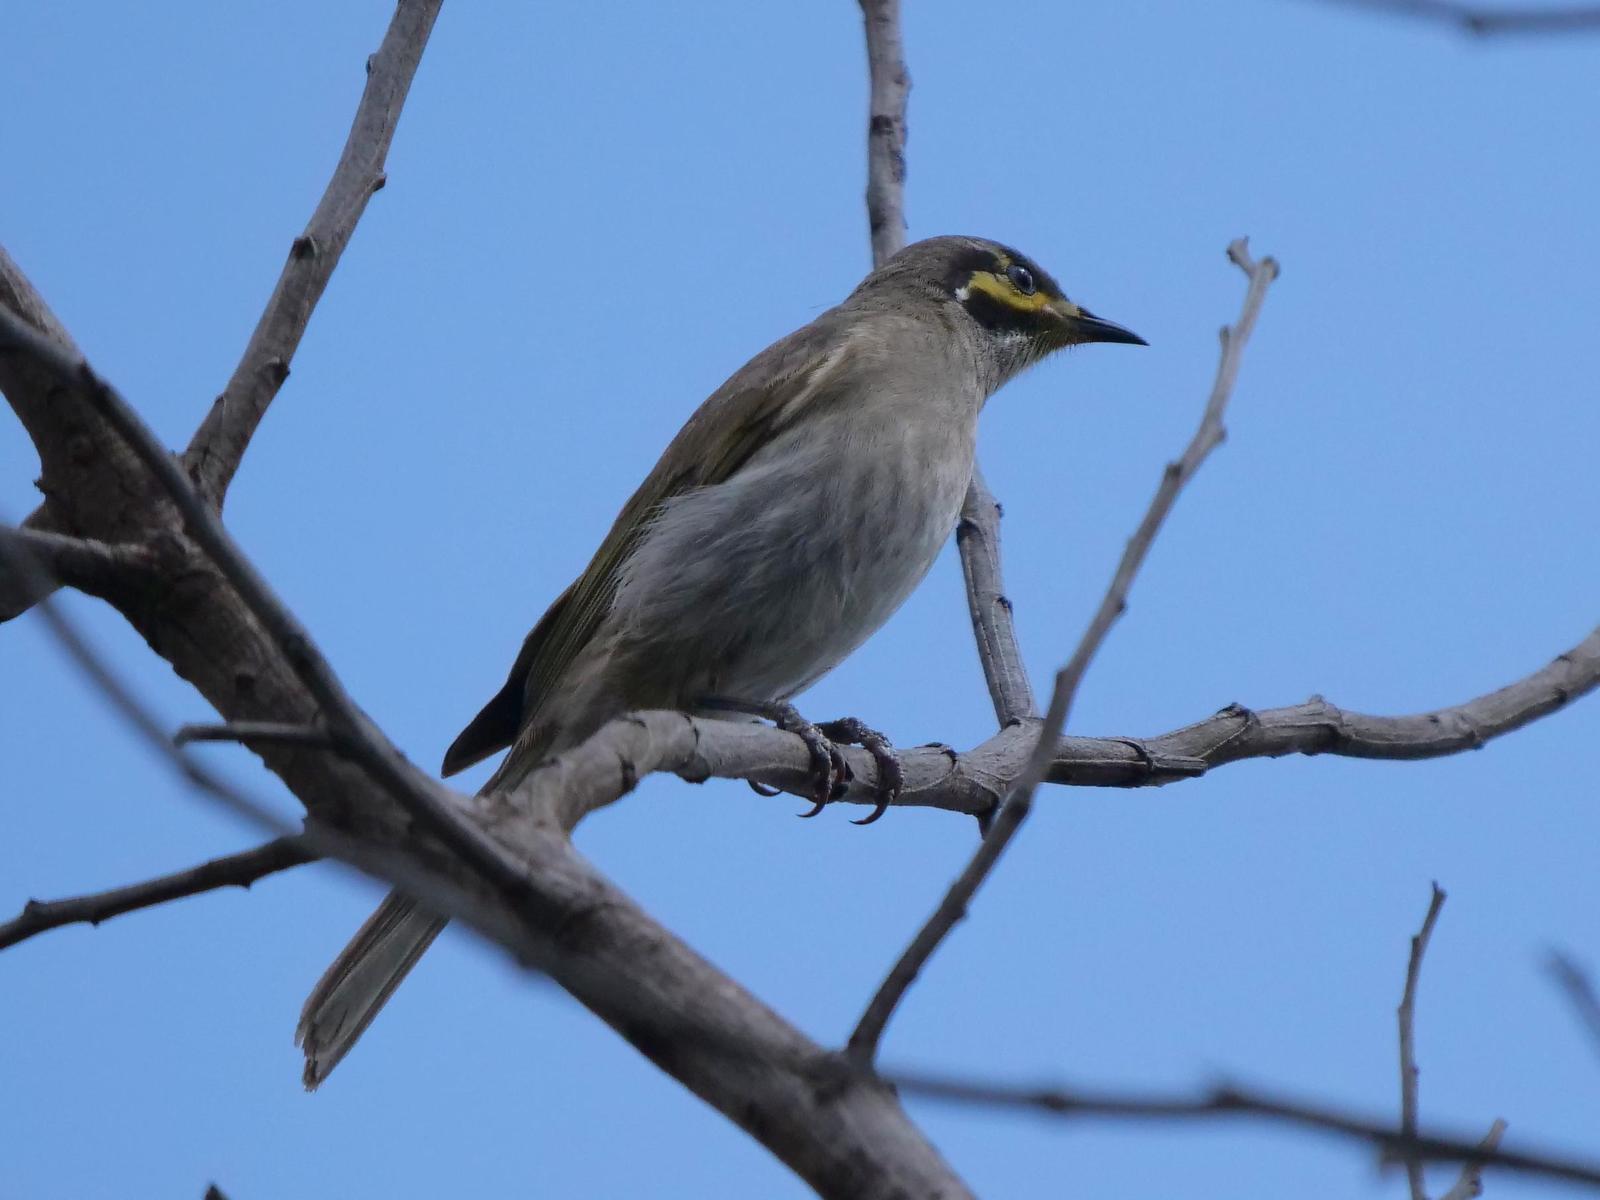 Yellow-faced Honeyeater Photo by Peter Lowe